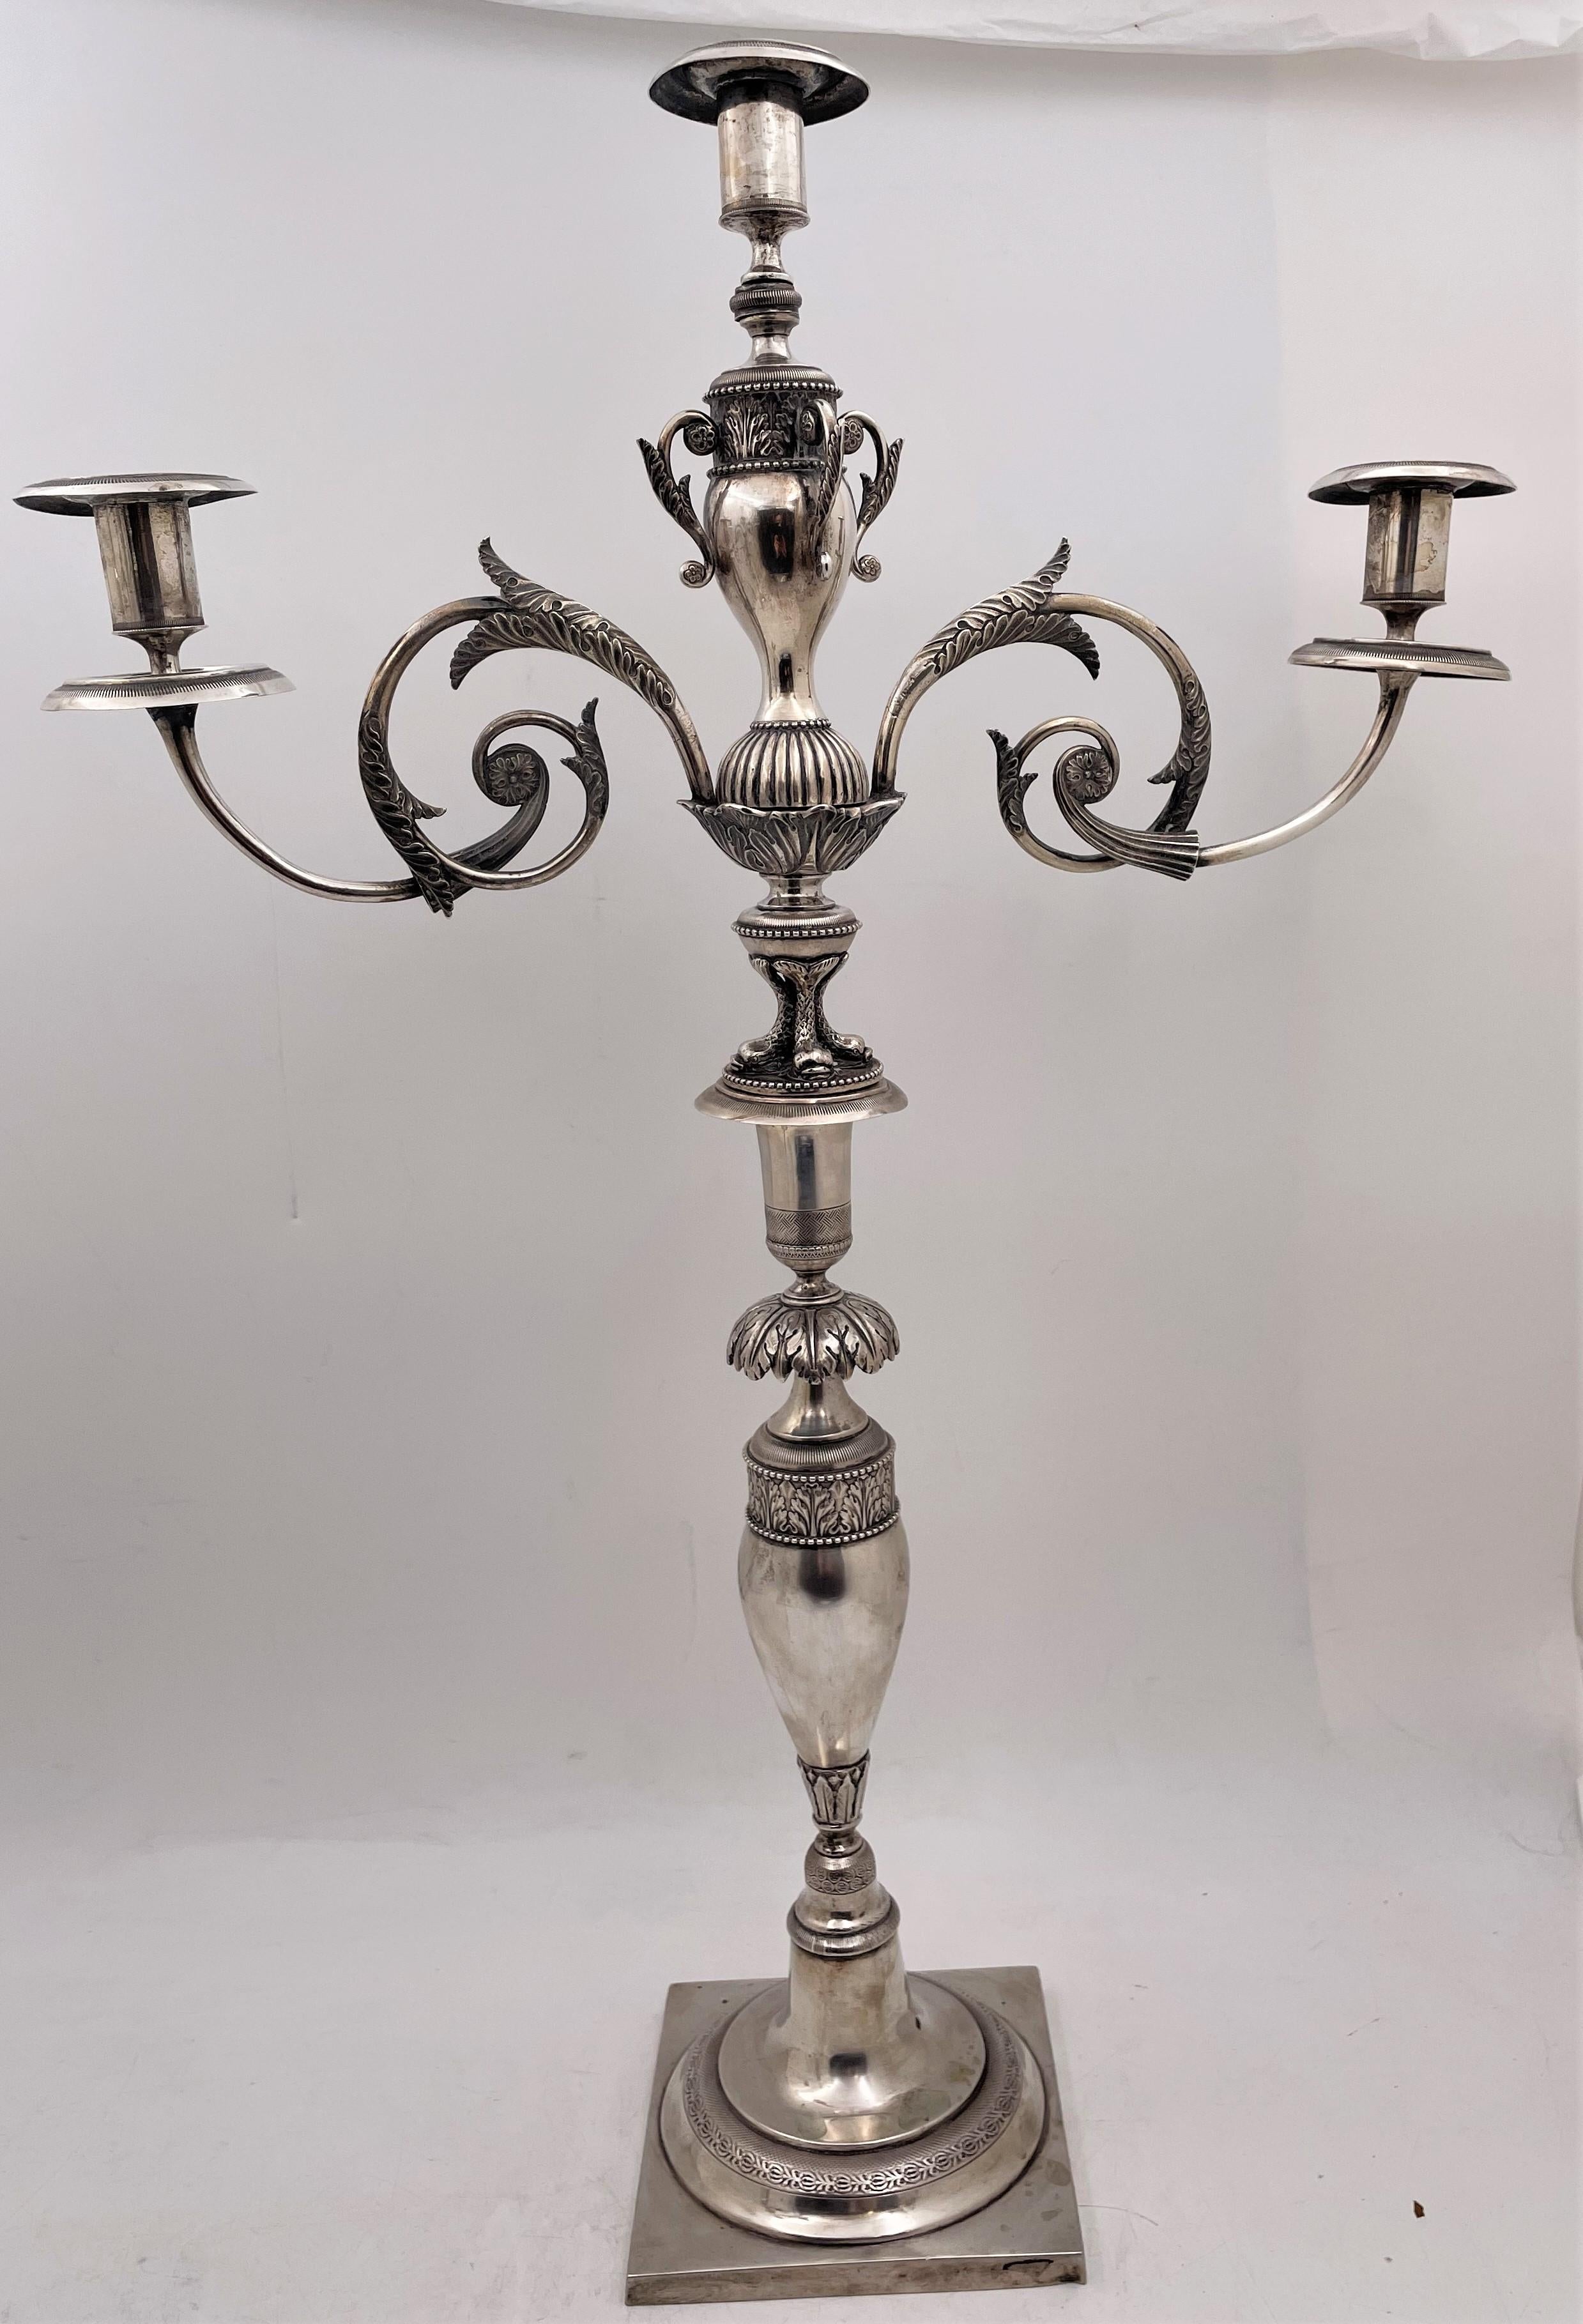 Pair of German silver, 3-light candelabra, probably from the late 18th century, showcasing exquisite natural and animal motifs, including dolphins, measuring 23'' in height by 15 3/4'' from arm to arm by 5'' in depth, weighing 102.4 troy ounces, and